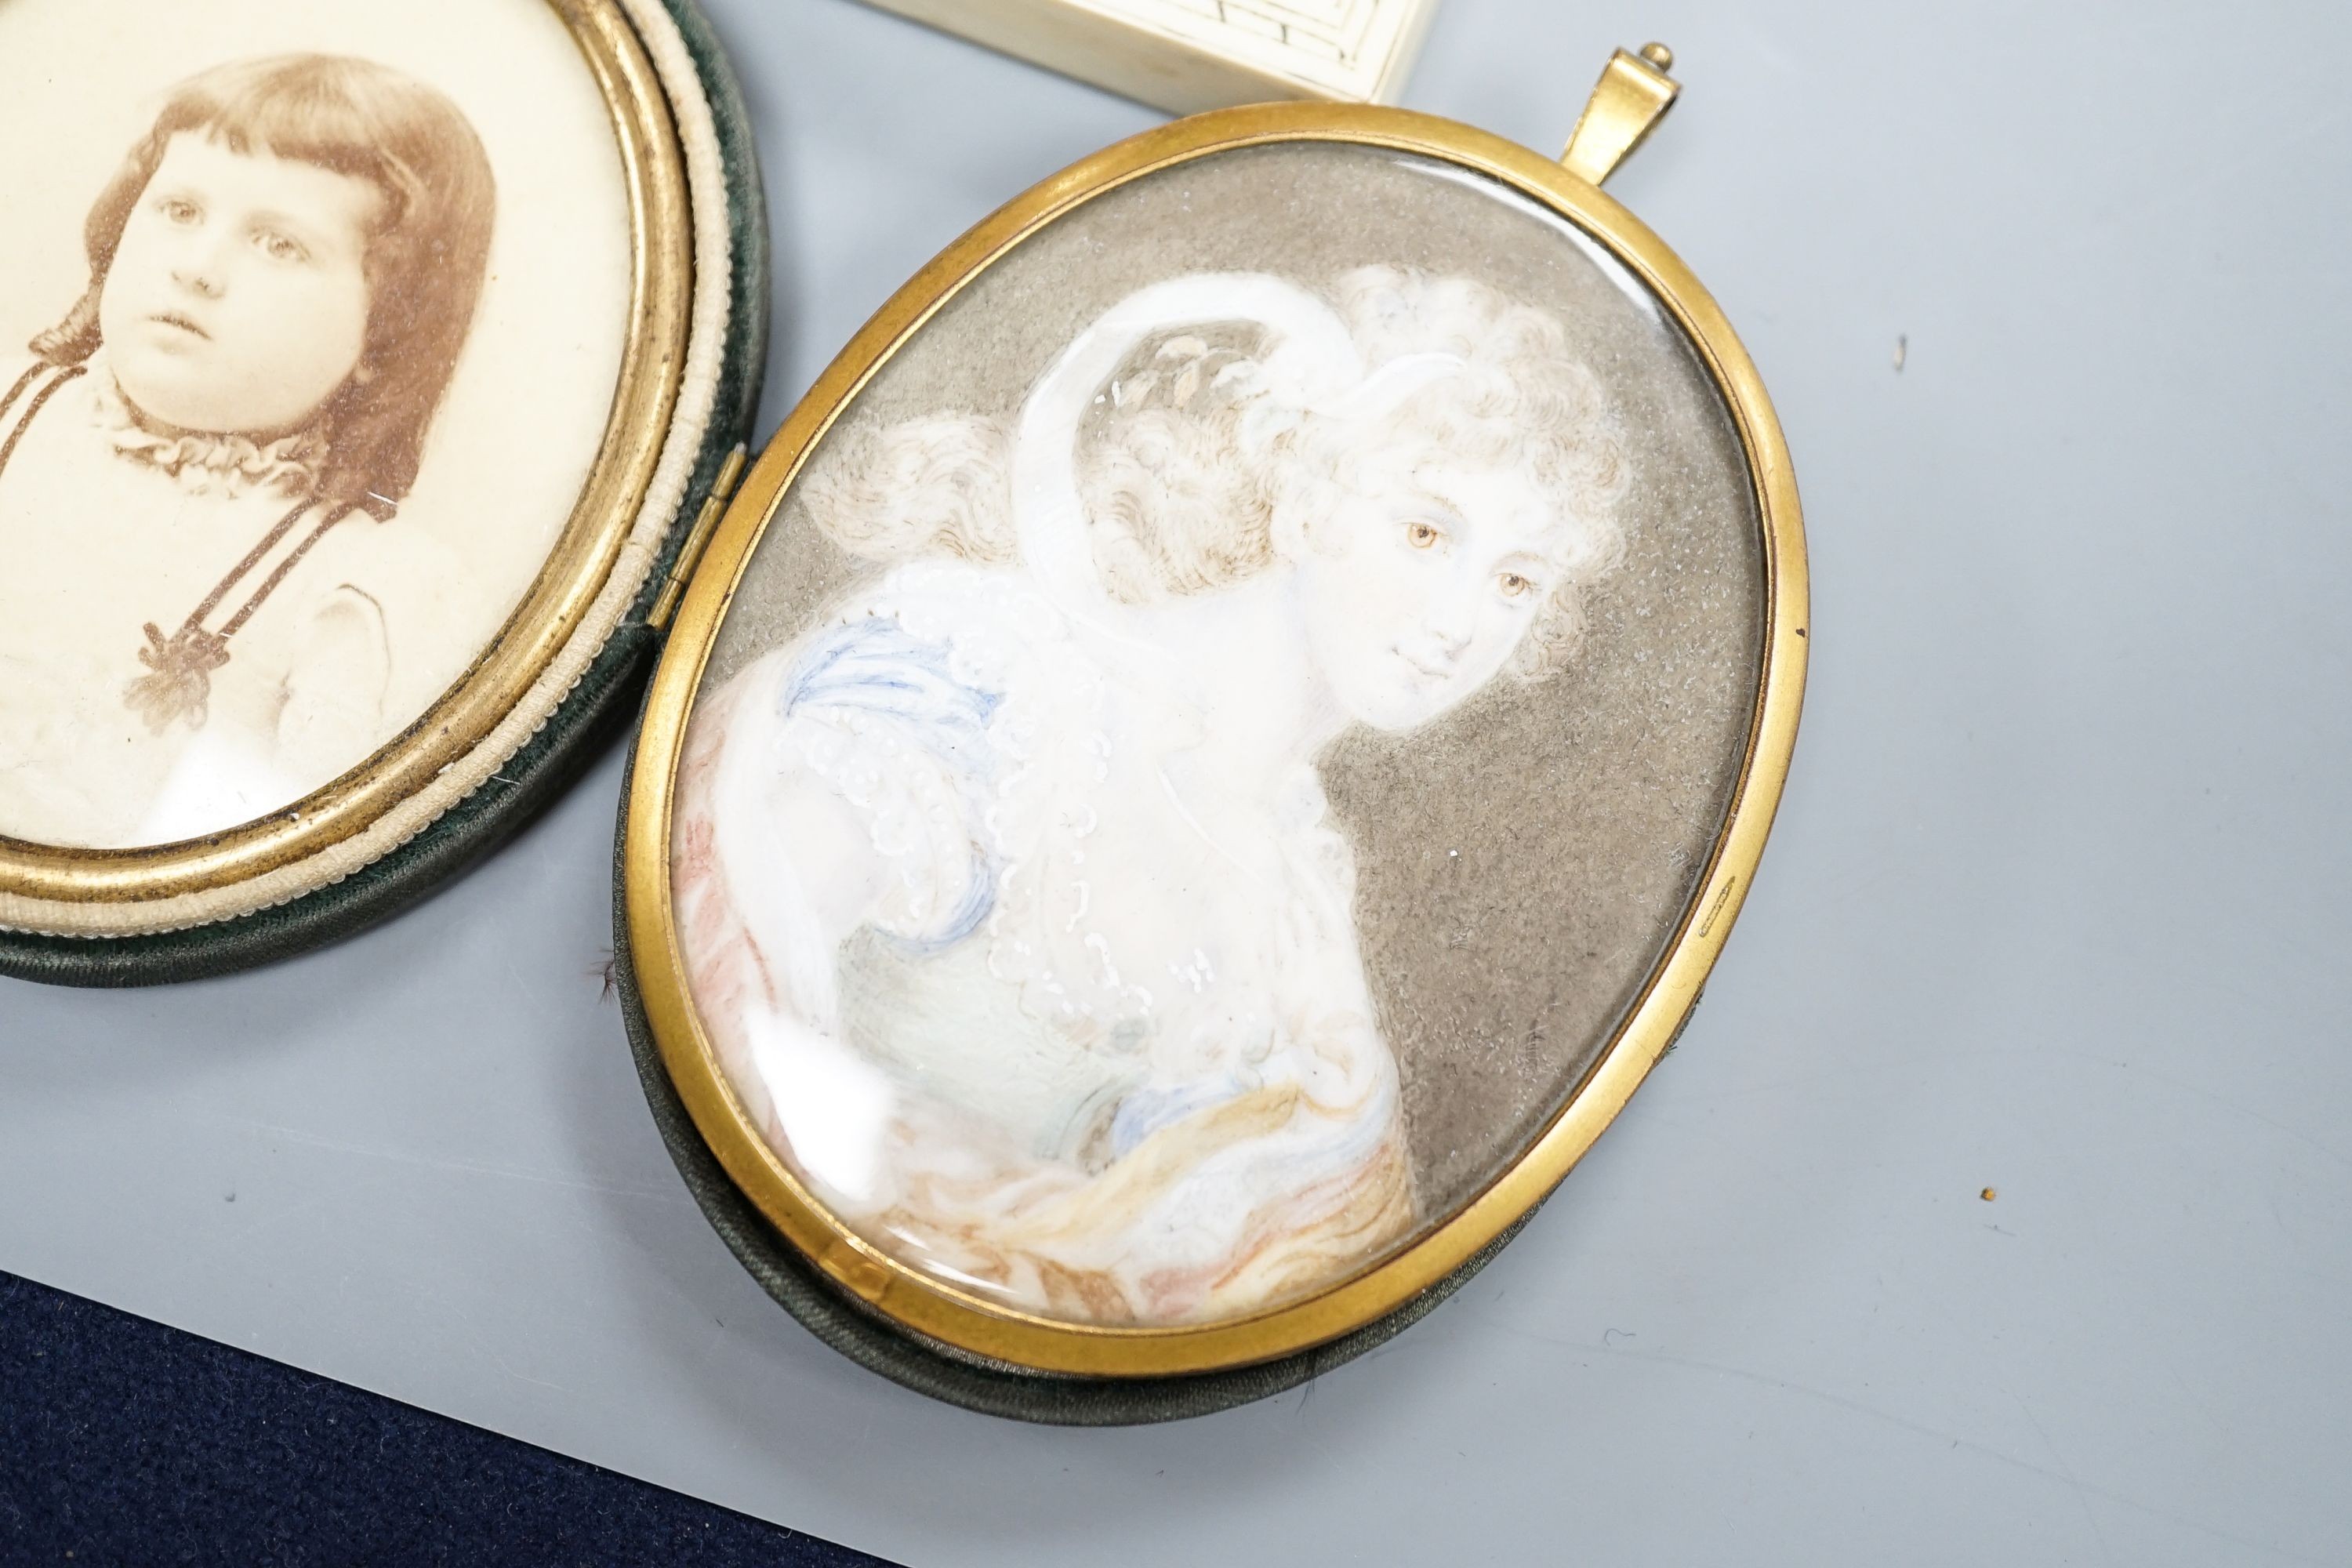 A paste and enamel framed Portrait miniature on ivory, 9.2cm and four other portrait miniatures (three on ivory)